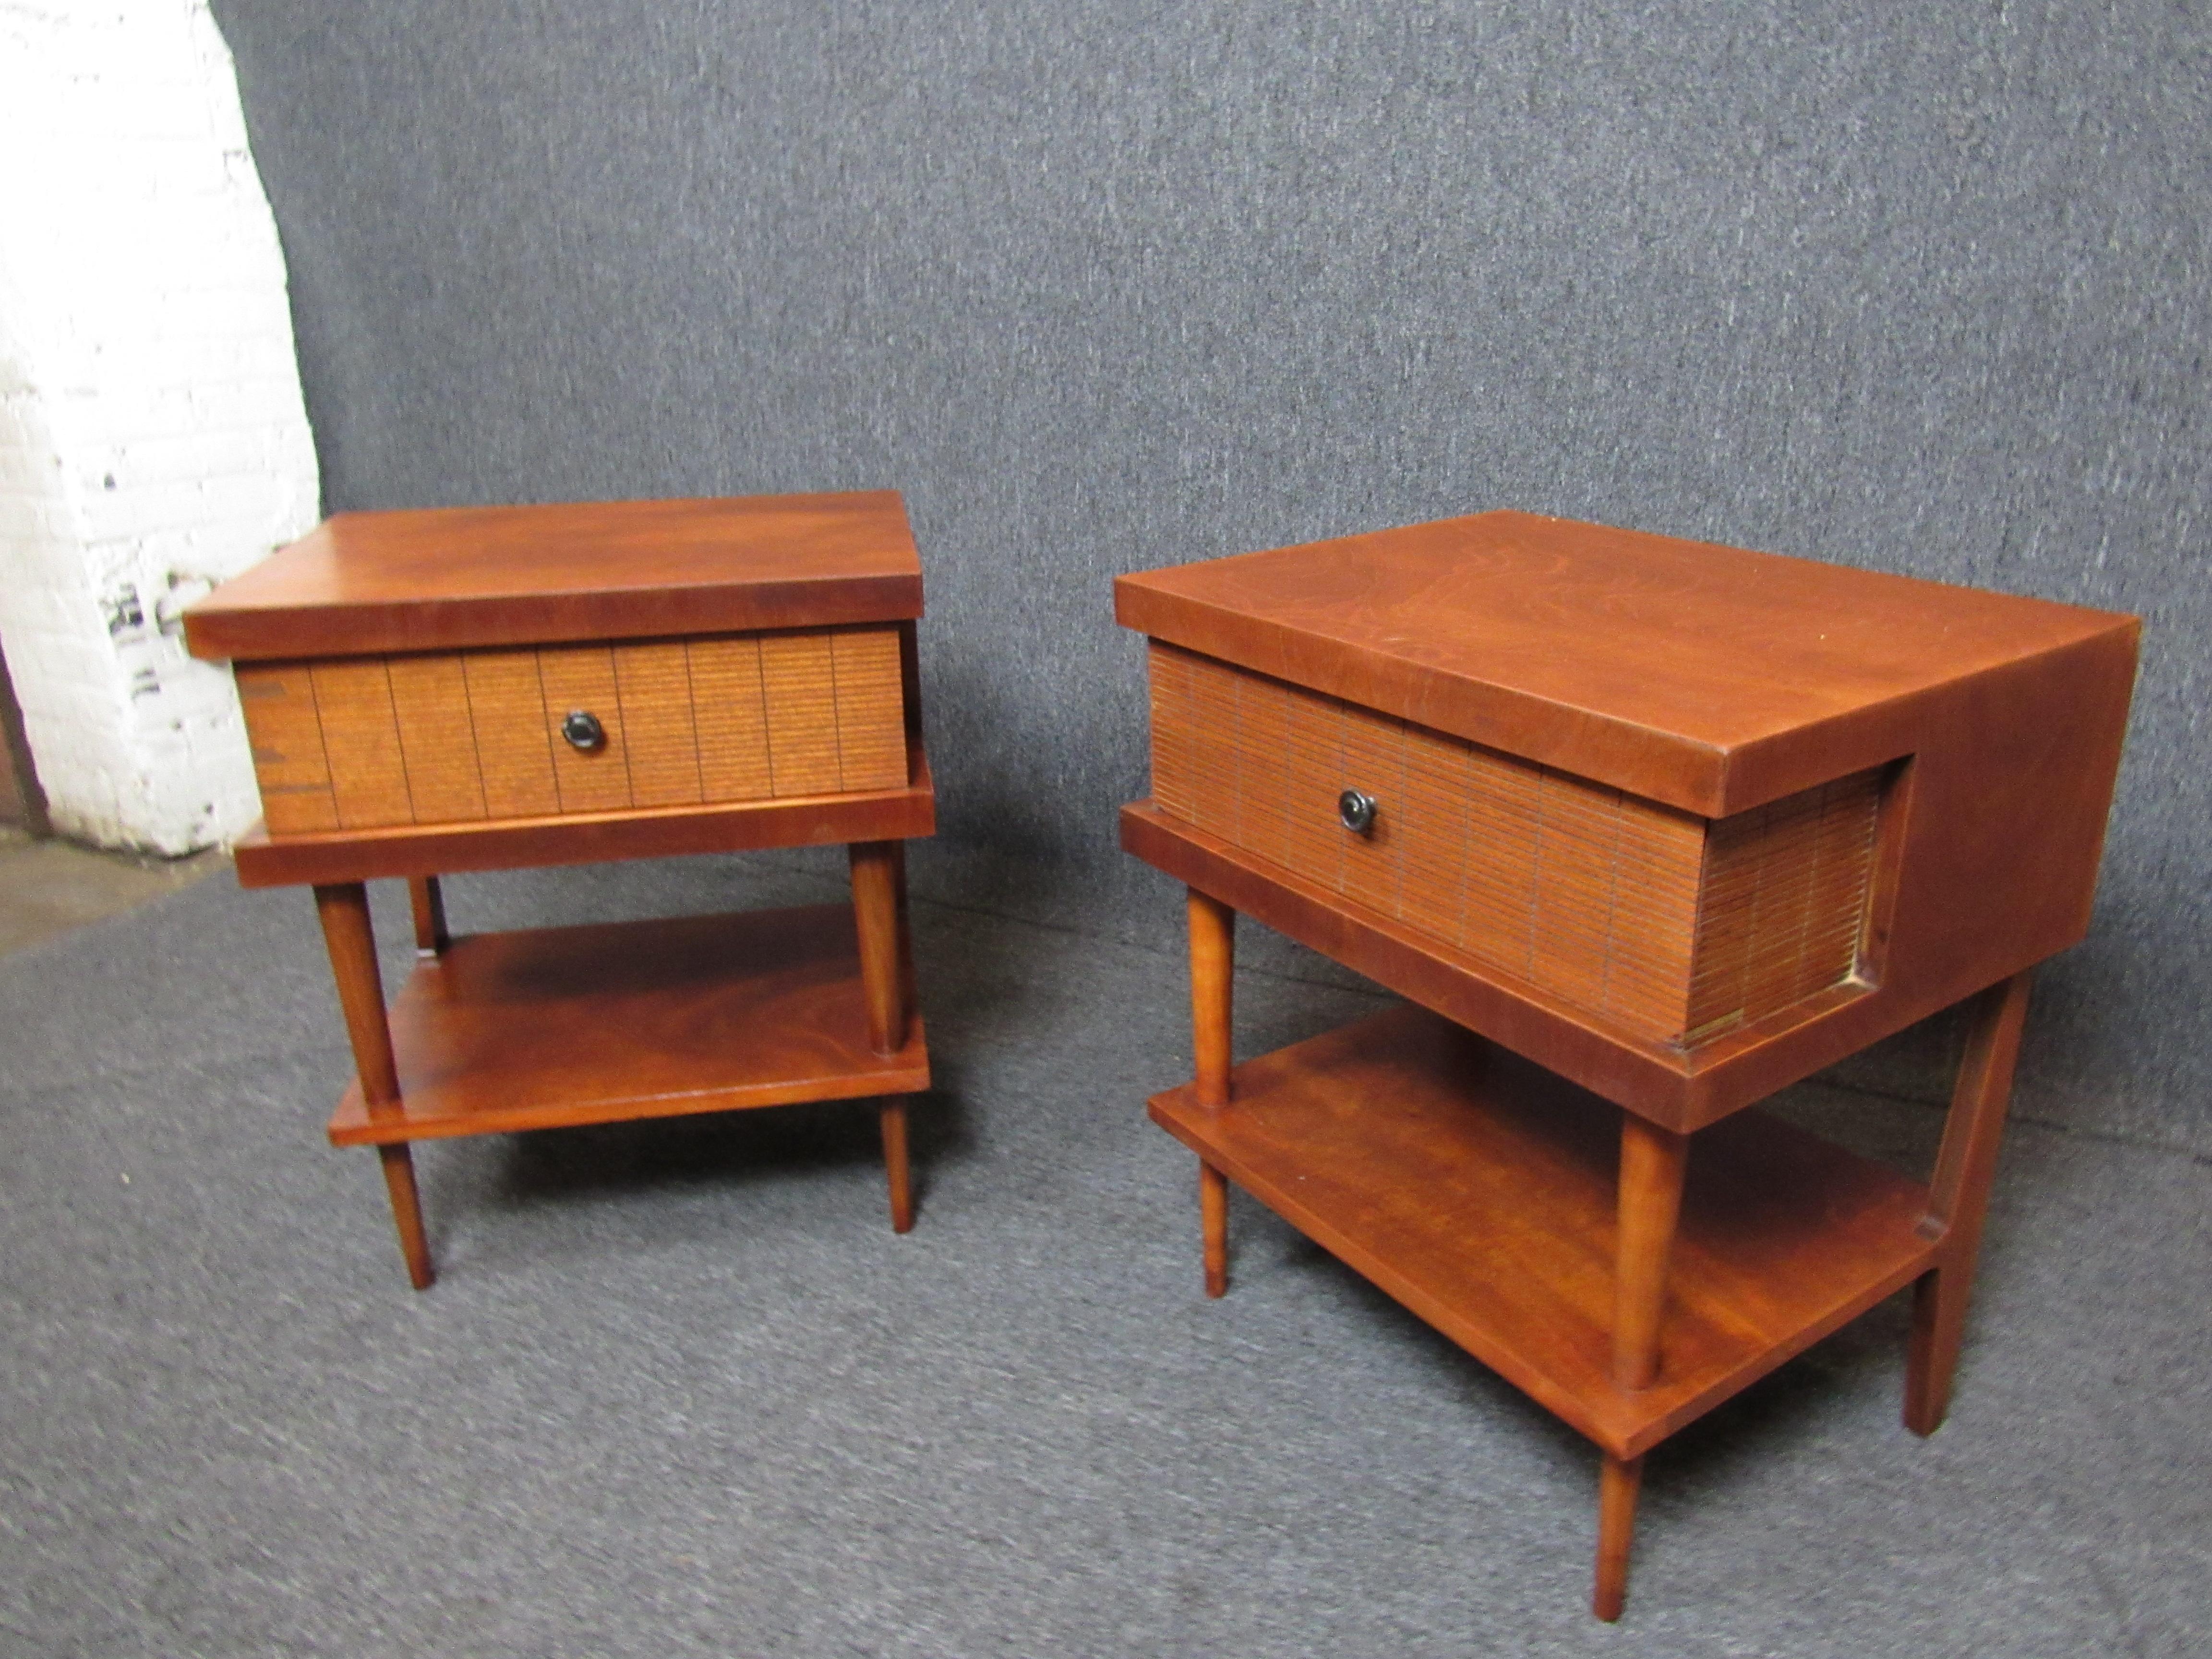 Sleek pair of vintage modern nightstands in walnut wood grain, featuring one drawer for storage and one shelf.
(Please confirm item location - NY or NJ - with dealer)

